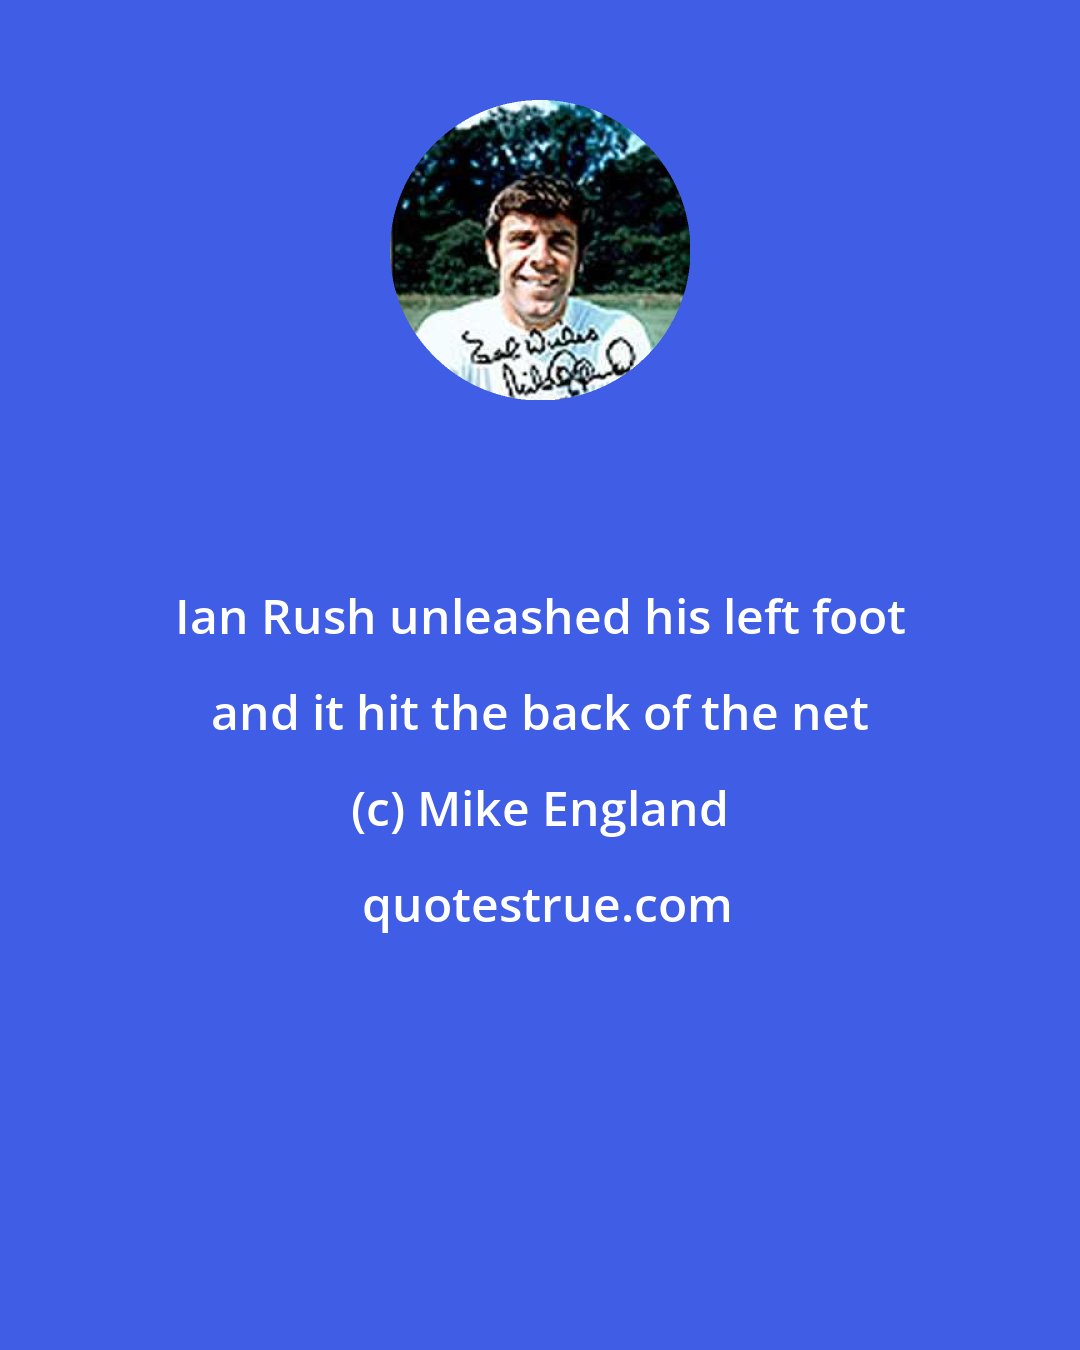 Mike England: Ian Rush unleashed his left foot and it hit the back of the net